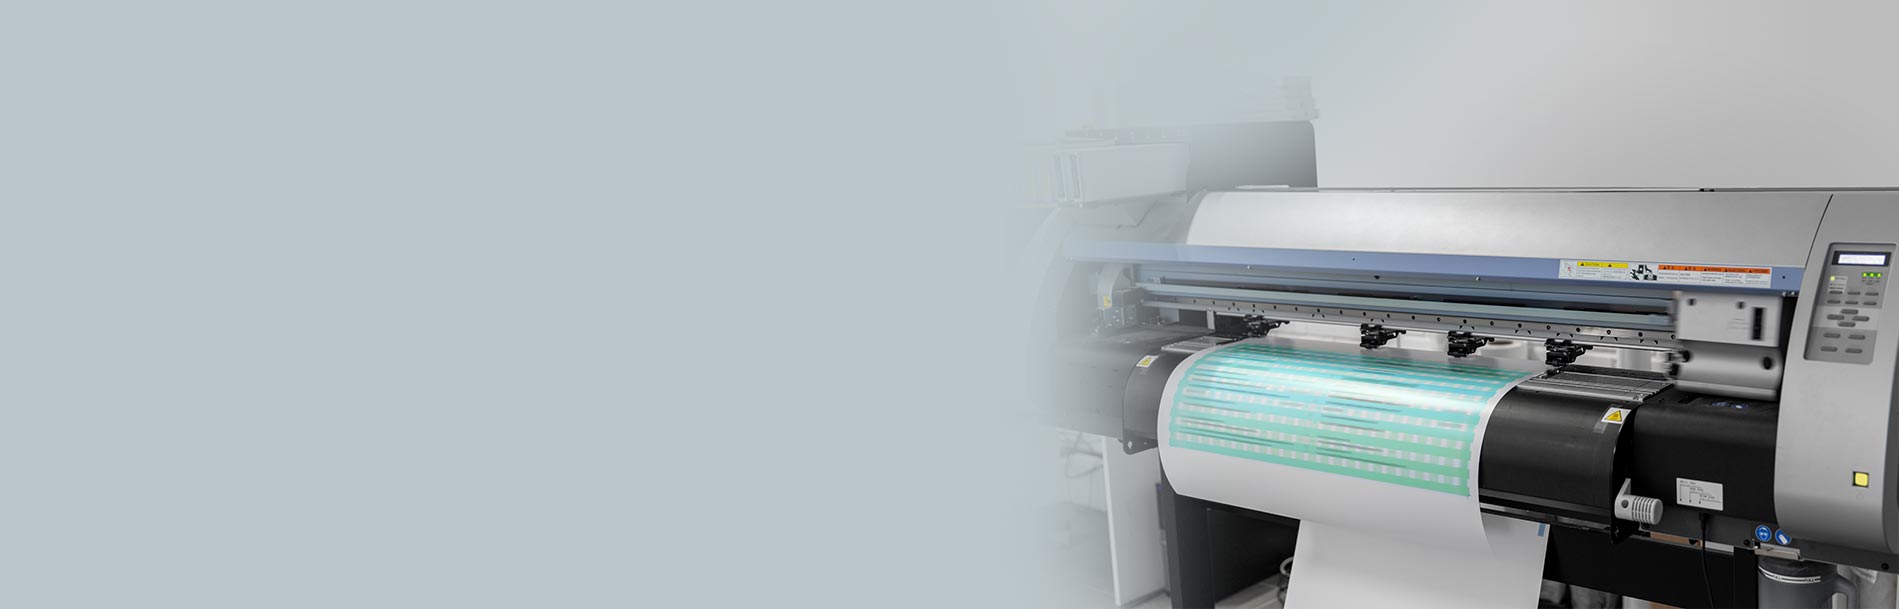 printing equipment and technology concept - large format printer